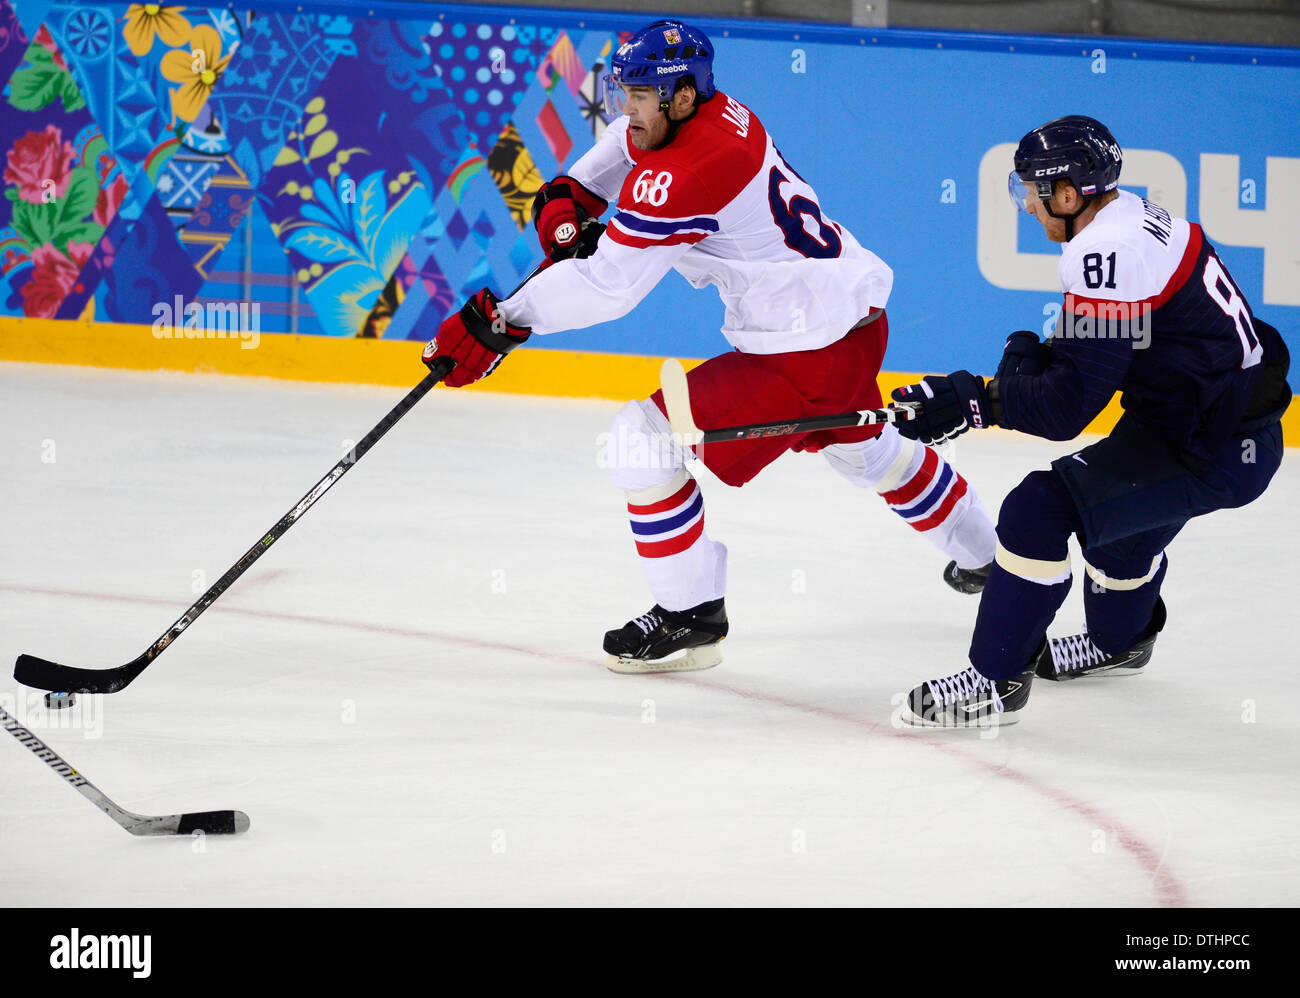 Jaromir Jagr of Czech Republic, left, and Marian Hossa of Slovakia pictured during the 2014 Winter Olympics men's ice hockey game Czech Republic vs Slovakia at Shayba Arena in Sochi, Russia, February 18, 2014. (CTK Photo/Roman Vondrous) Stock Photo